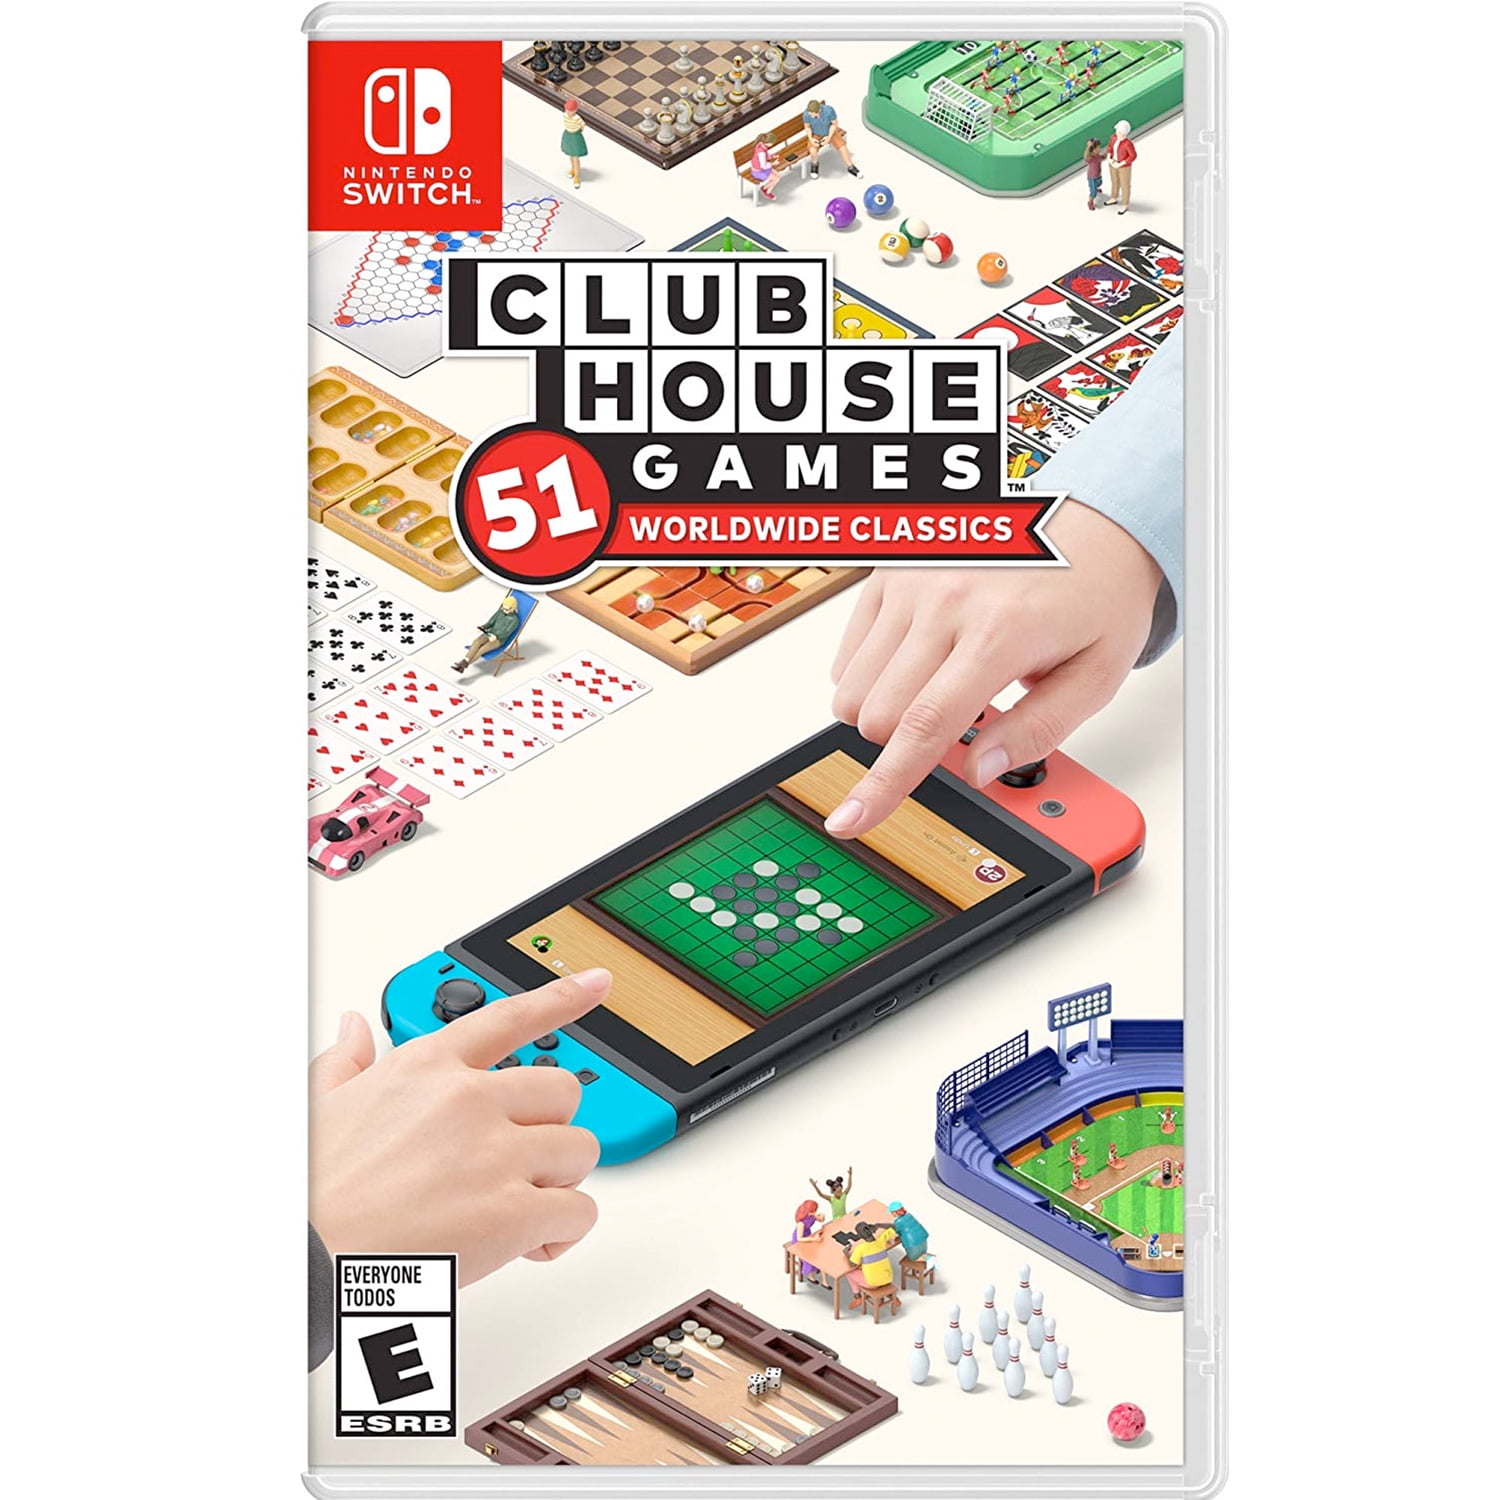 Chess Ultra Review - Review - Nintendo World Report